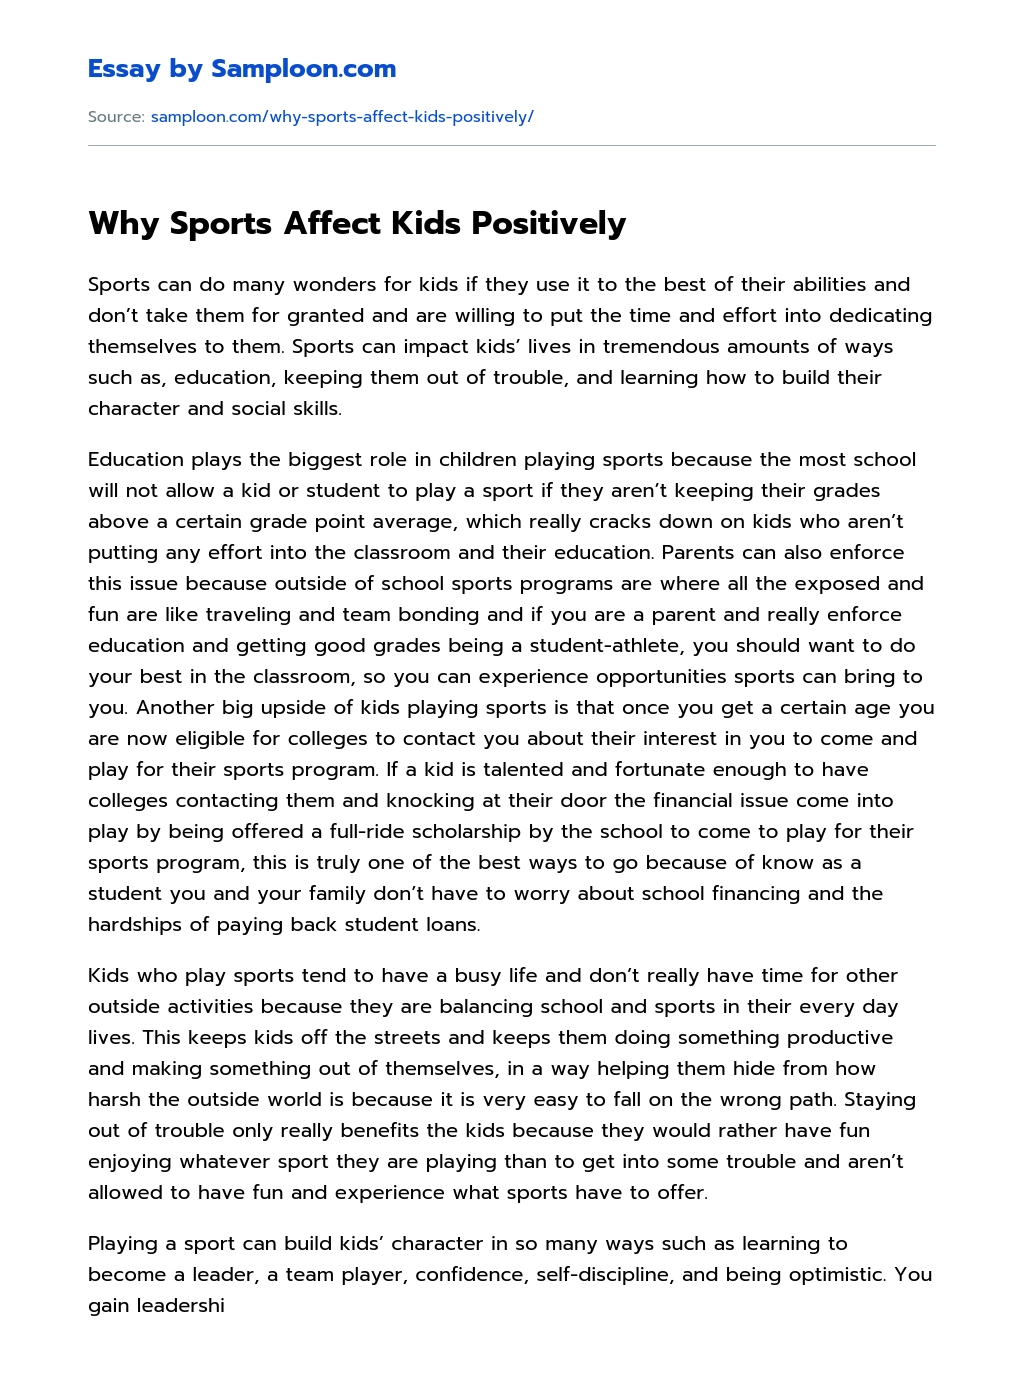 Why Sports Affect Kids Positively  essay